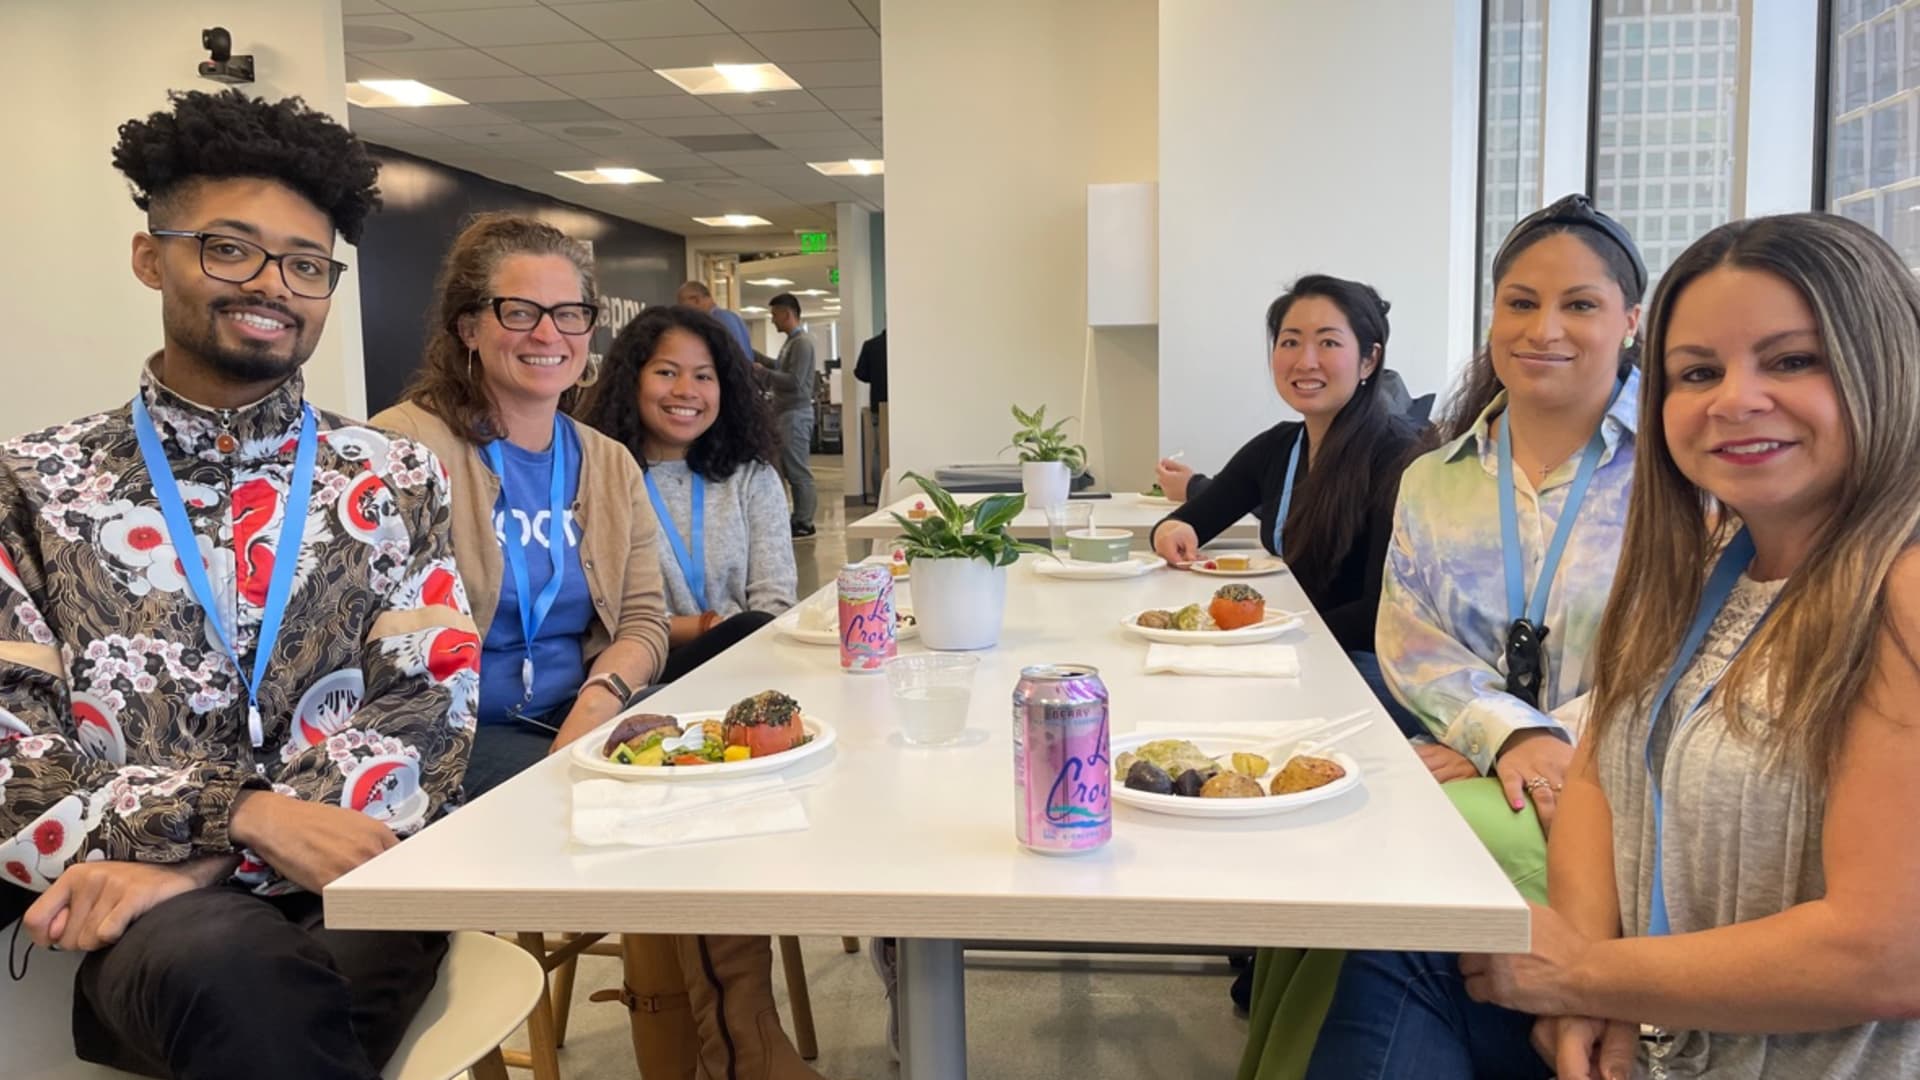 Nicole Perzigian eating lunch with co-workers during their first day back at Zoom's headquarters in San Jose